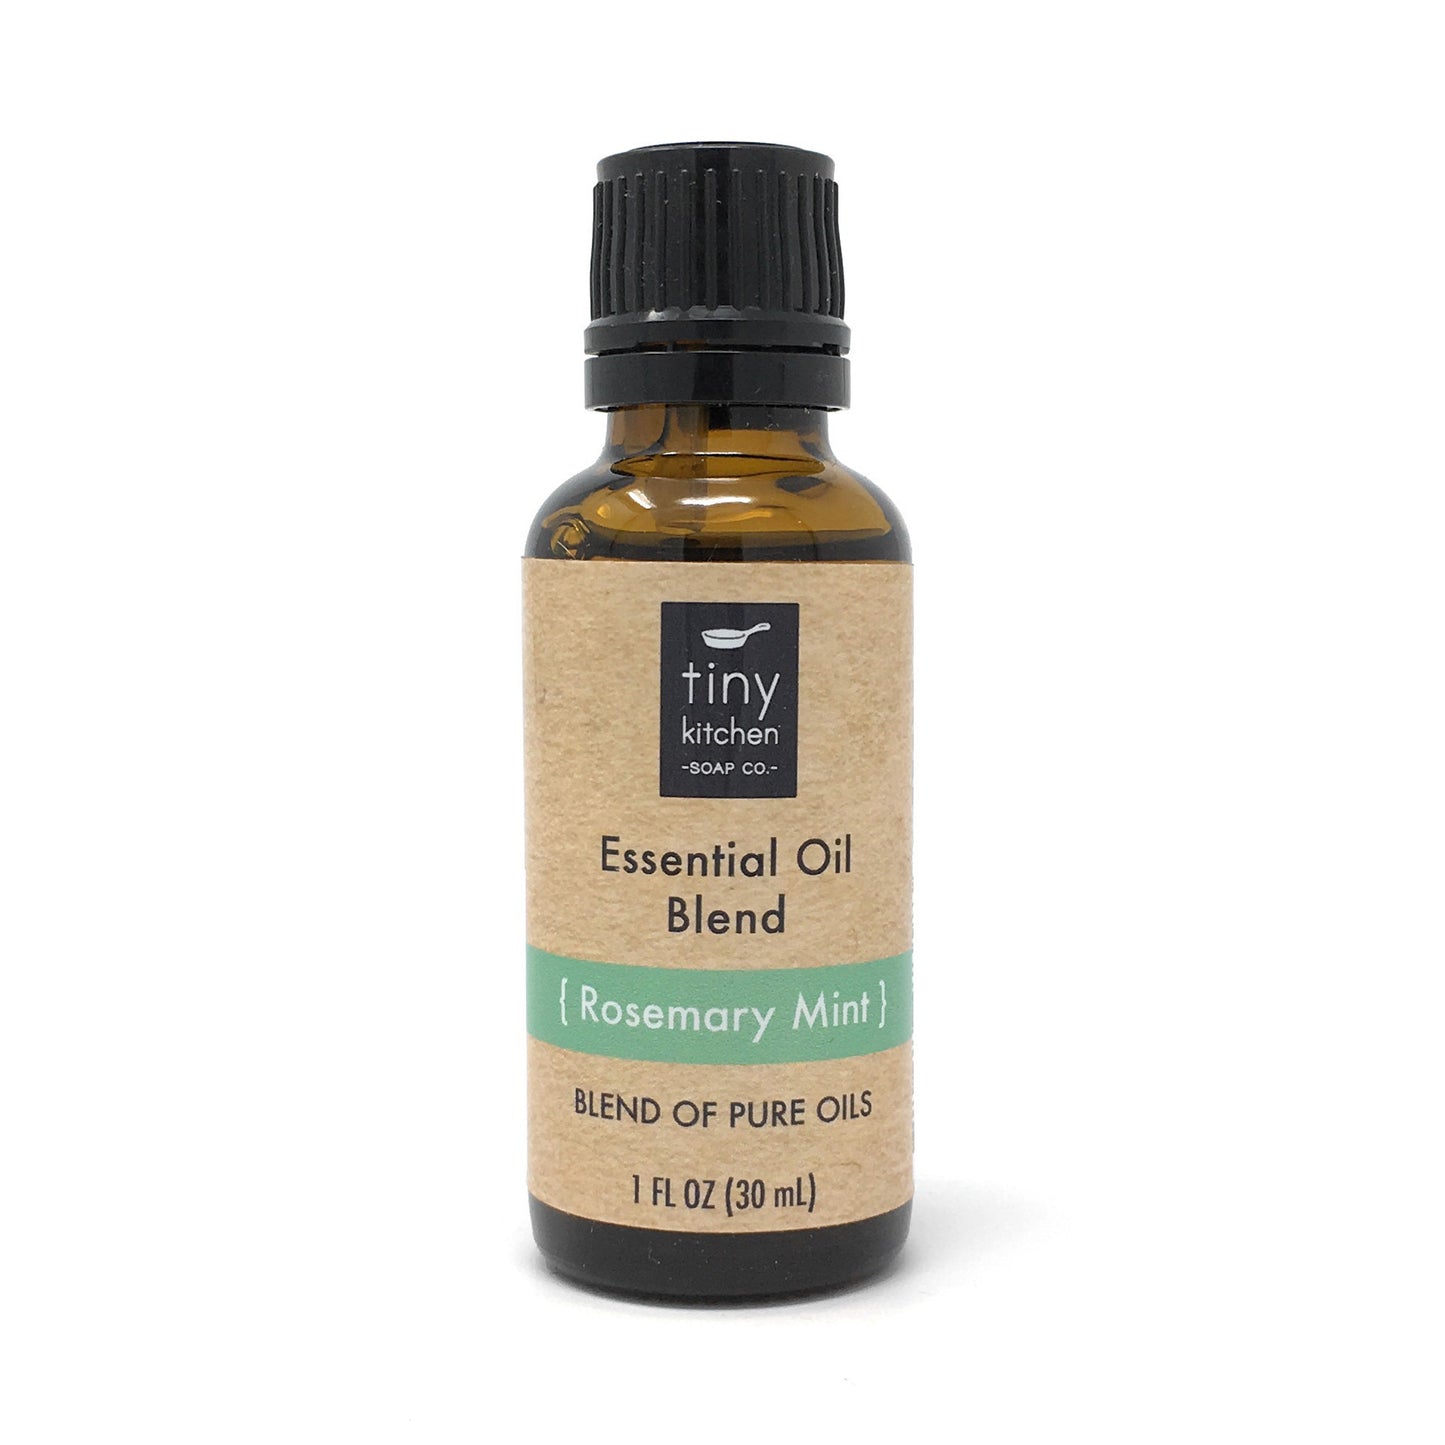 Rosemary Mint Essential Oil Blend